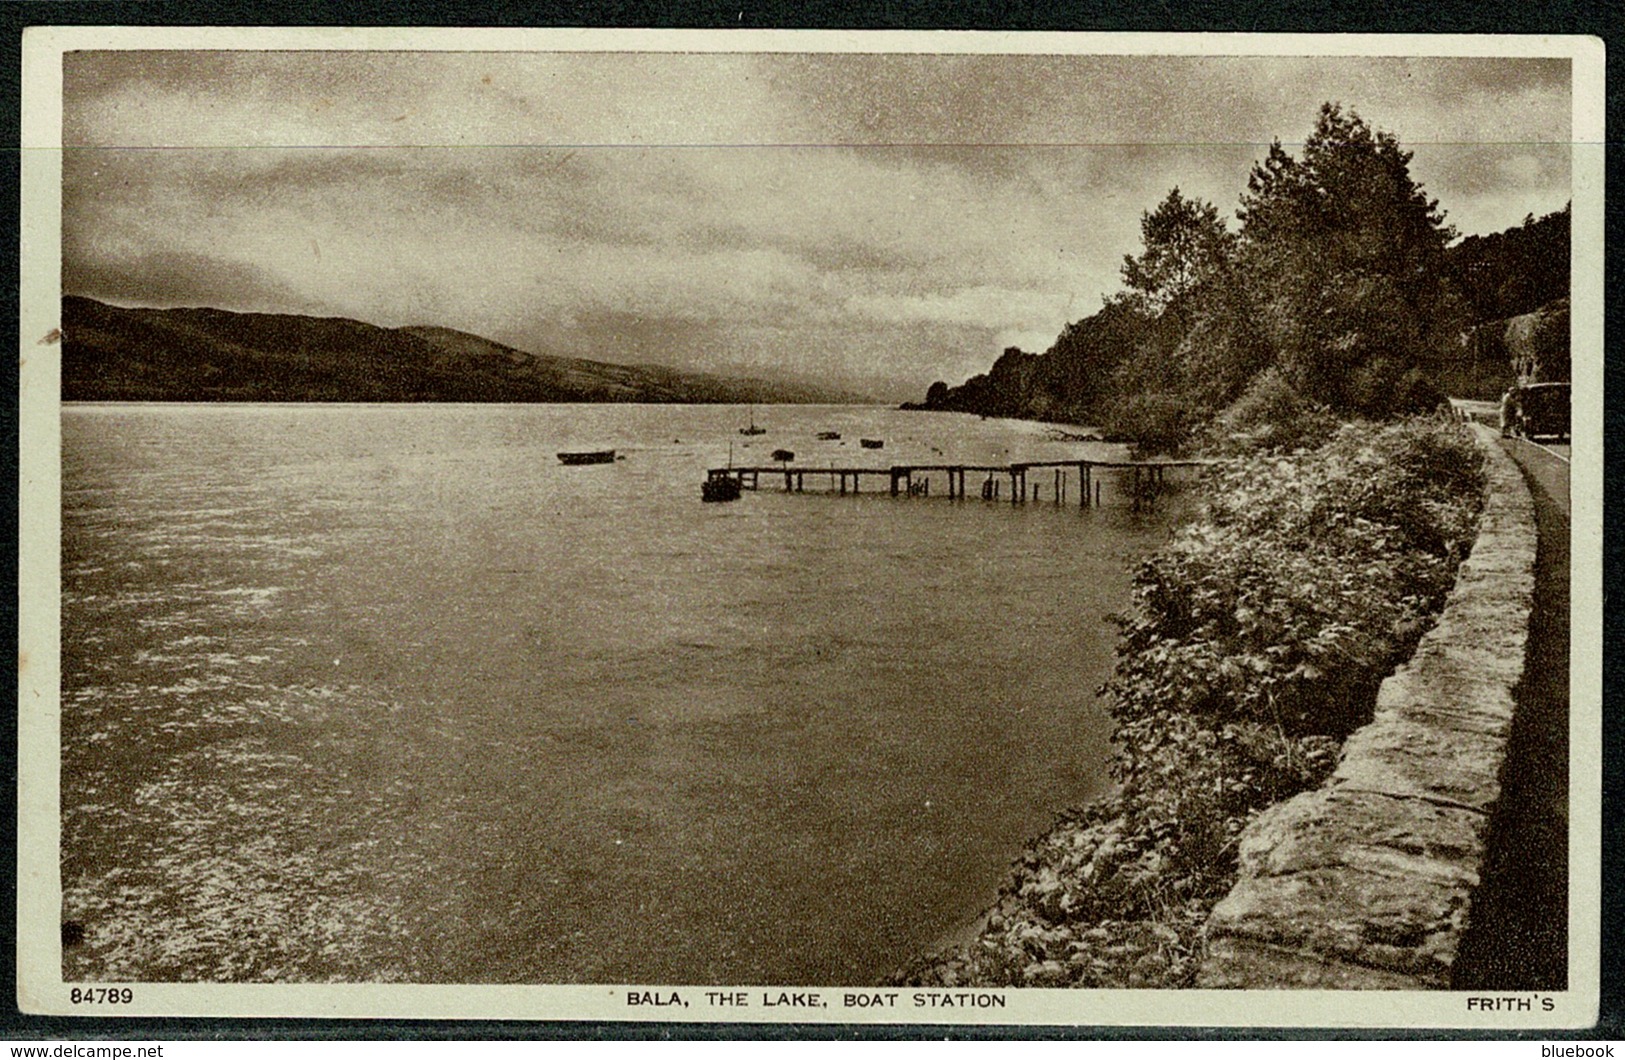 Ref 1299 - Early Postcard - The Lake Station Bala Merionethshire Wales - Merionethshire